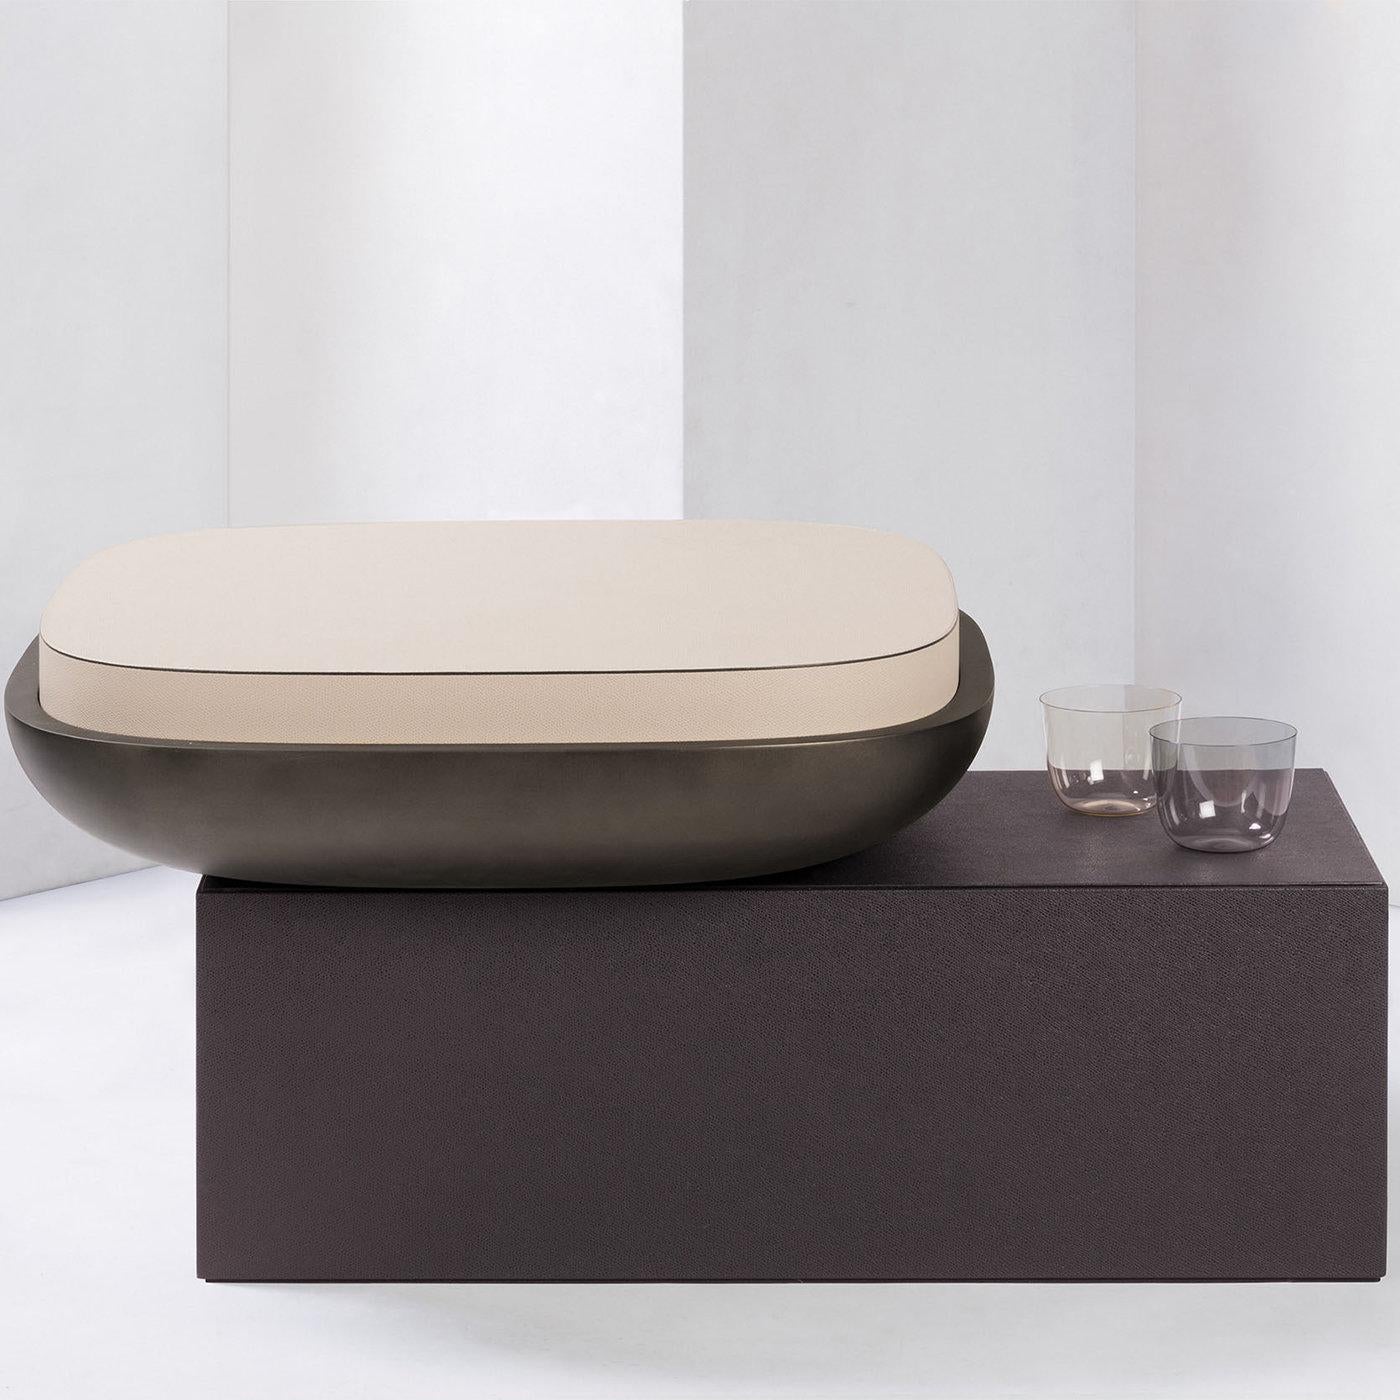 Contemporary leather stool & table - Olympia by Stephane Parmentier for Giobagnara.
The object presented in the image has following finish: G28 cipria printed calfskin golf leather (top), G25 Moka printed calfskin golf leather (base) and